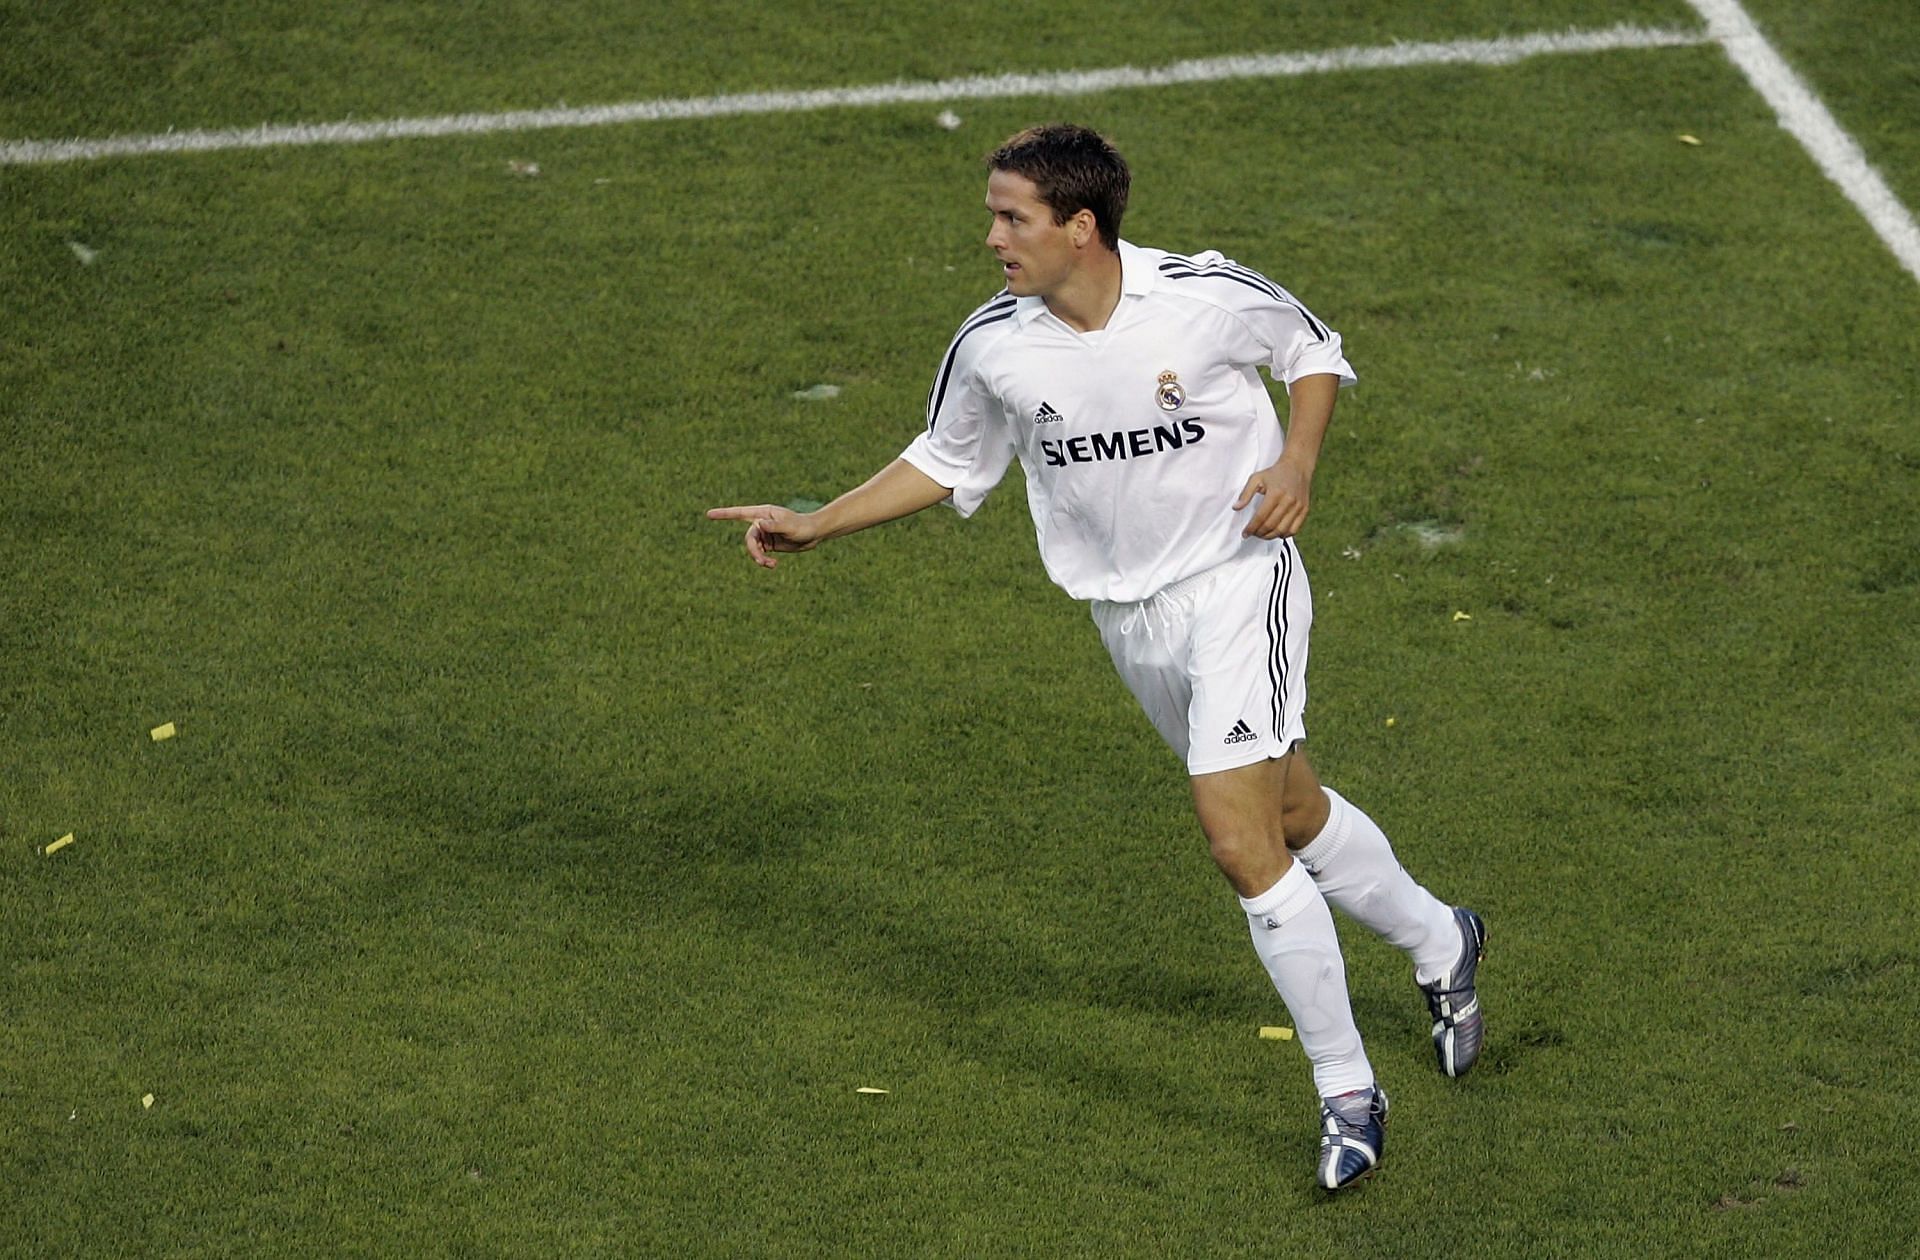 Owen spent just one disappointing season at Real Madrid.